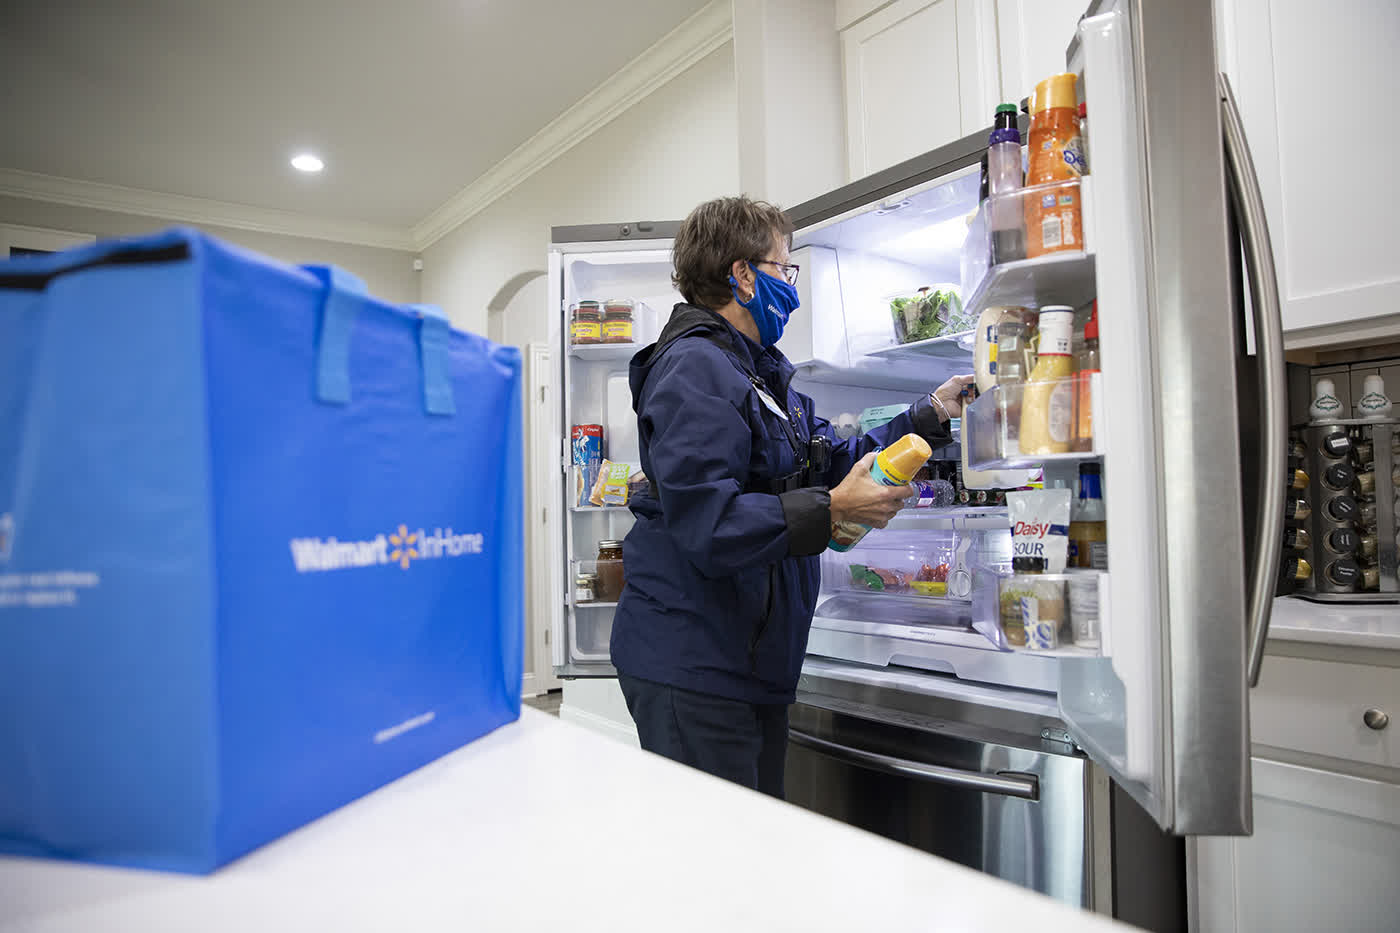 Walmart will expand InHome delivery service to reach 30 million homes by year's end thumbnail